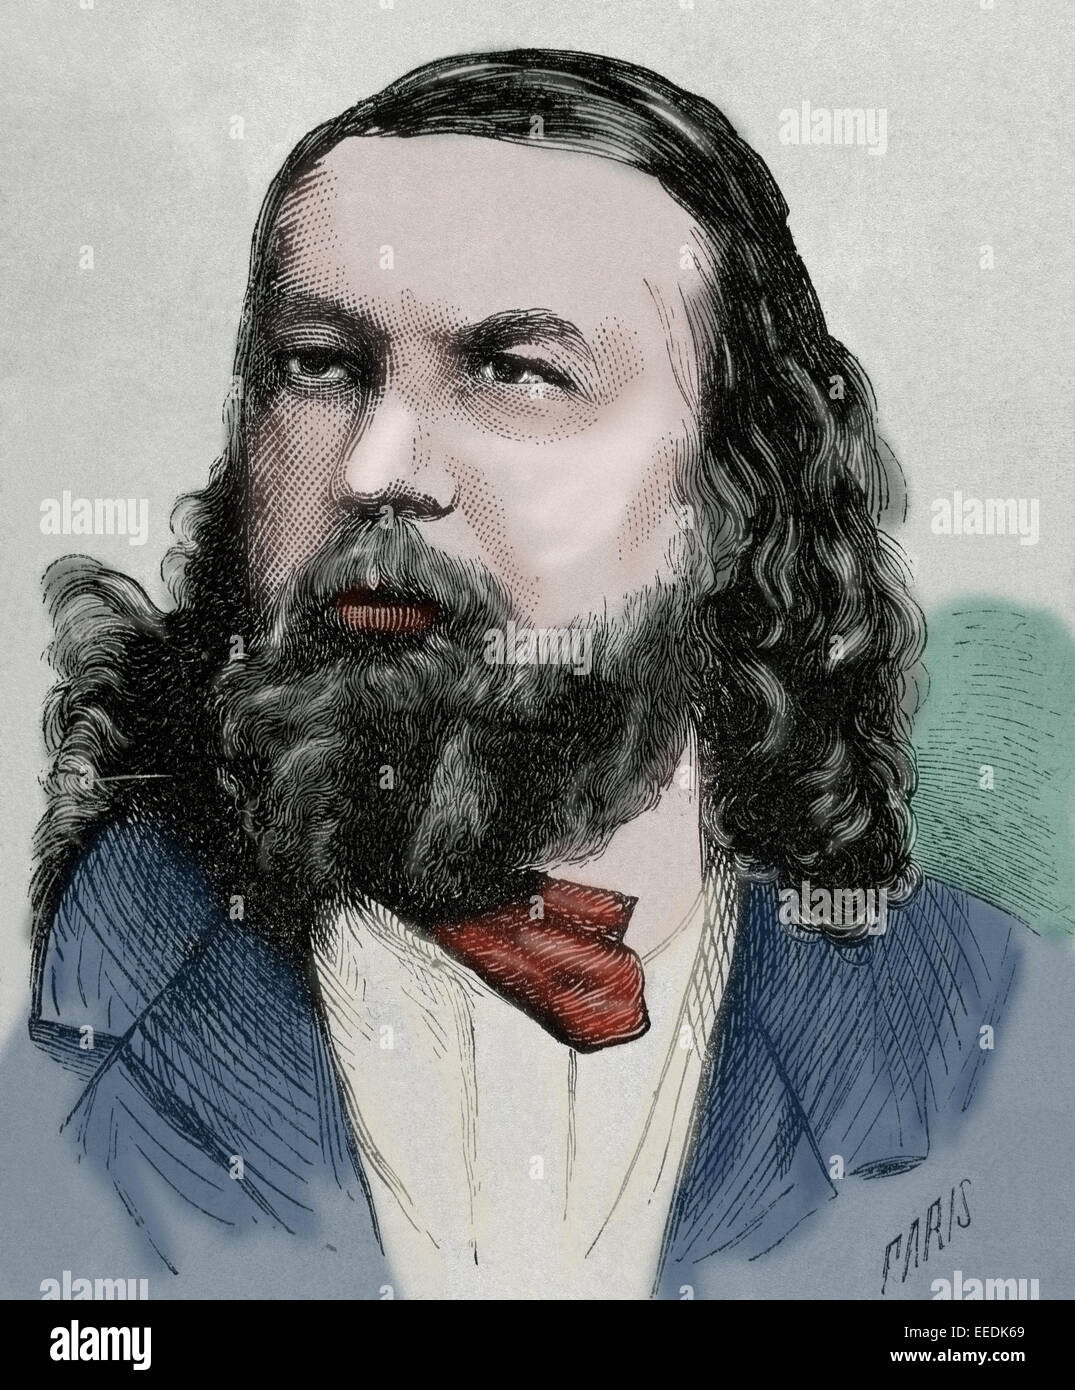 Theophile Gautier (1811-1872). French poet, dramatist, journalist, and art and literary critic. Engraving. Portrait. Colored. Stock Photo